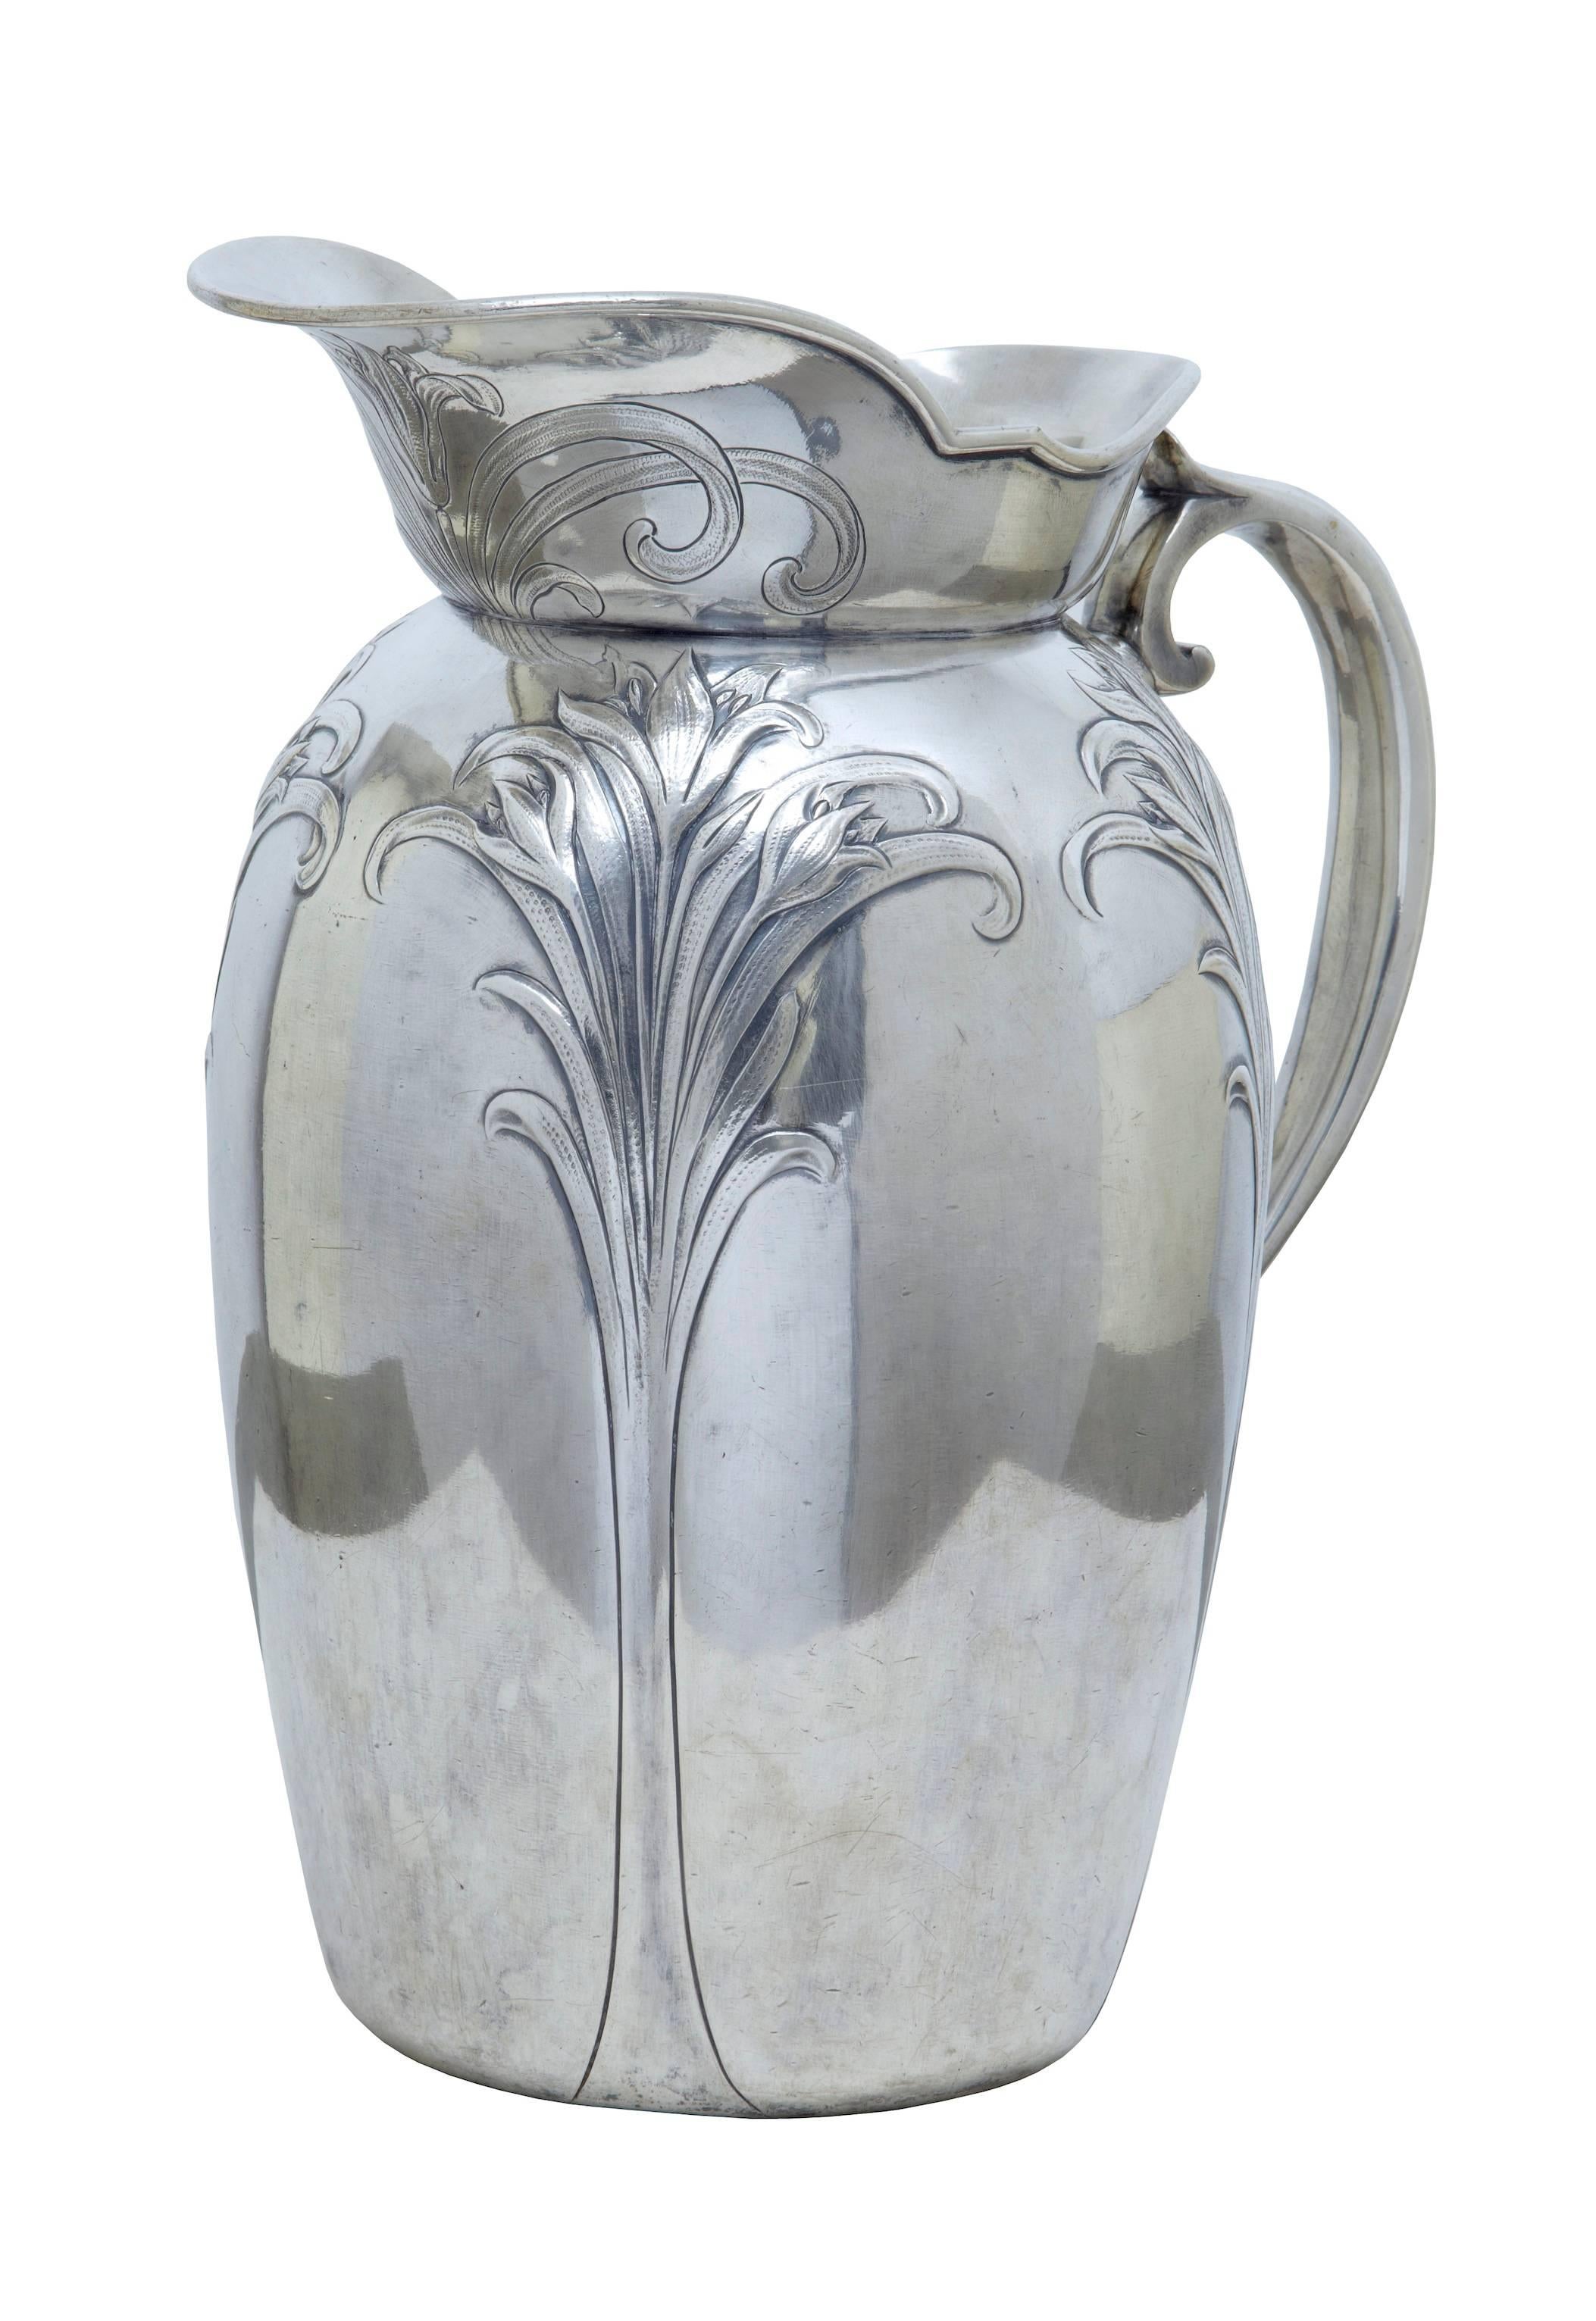 Metalwork Late 19th Century Art Nouveau Silver Plate Jug and Bowl by Christofle